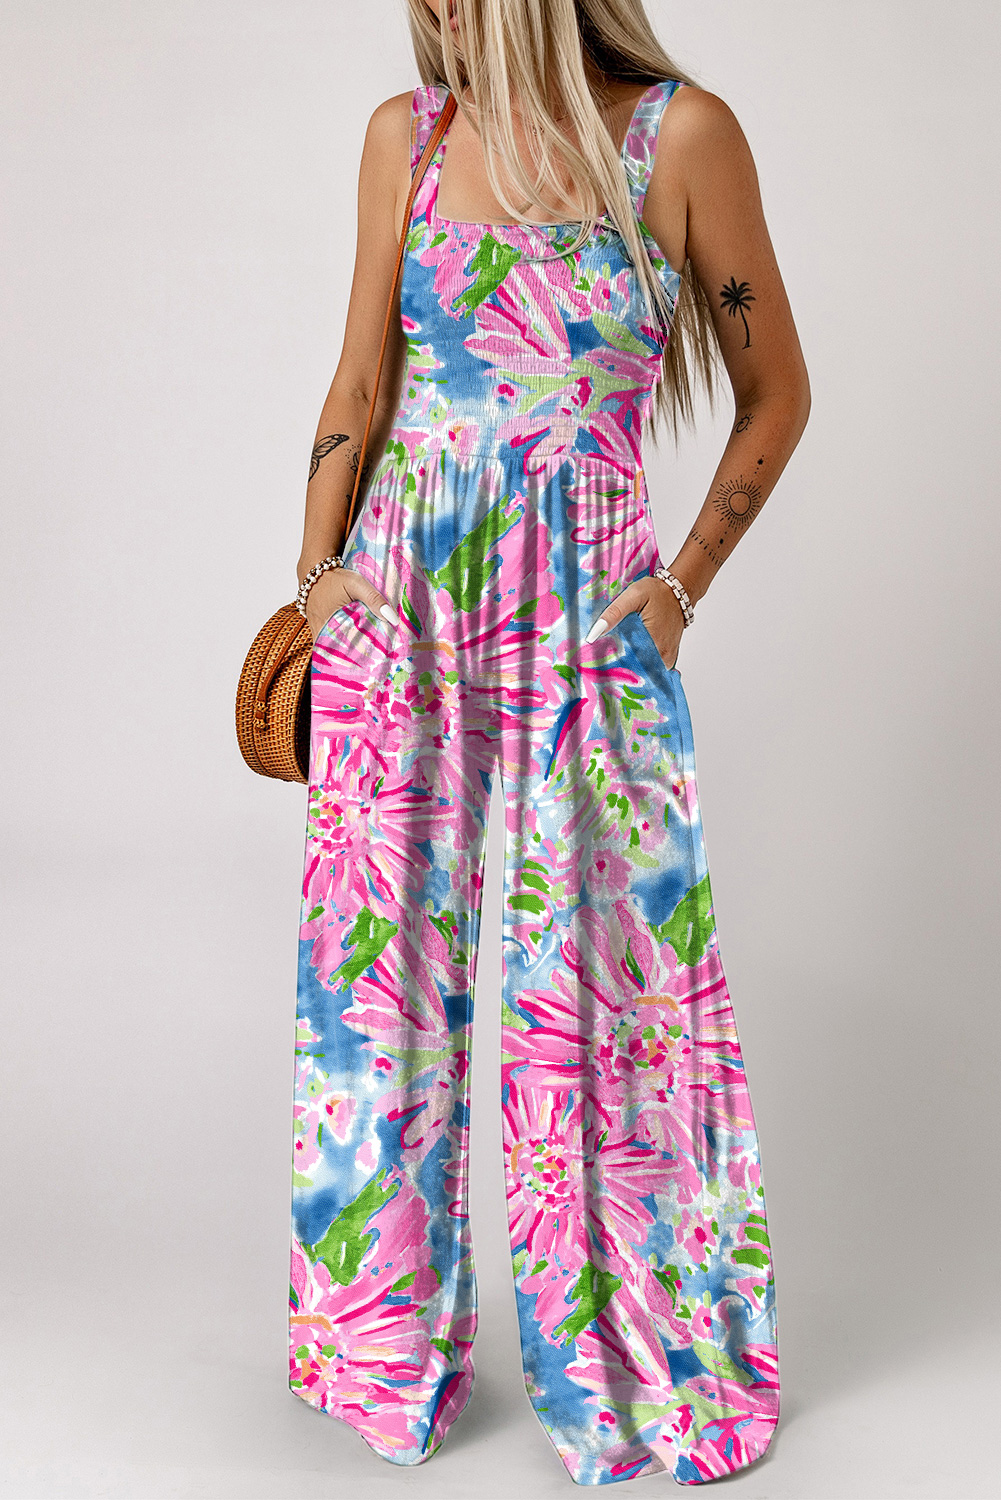 Shewin Wholesale CLOTHING Vendors Pink Abstract Floral Painting Smocked Wide Leg Jumpsuit